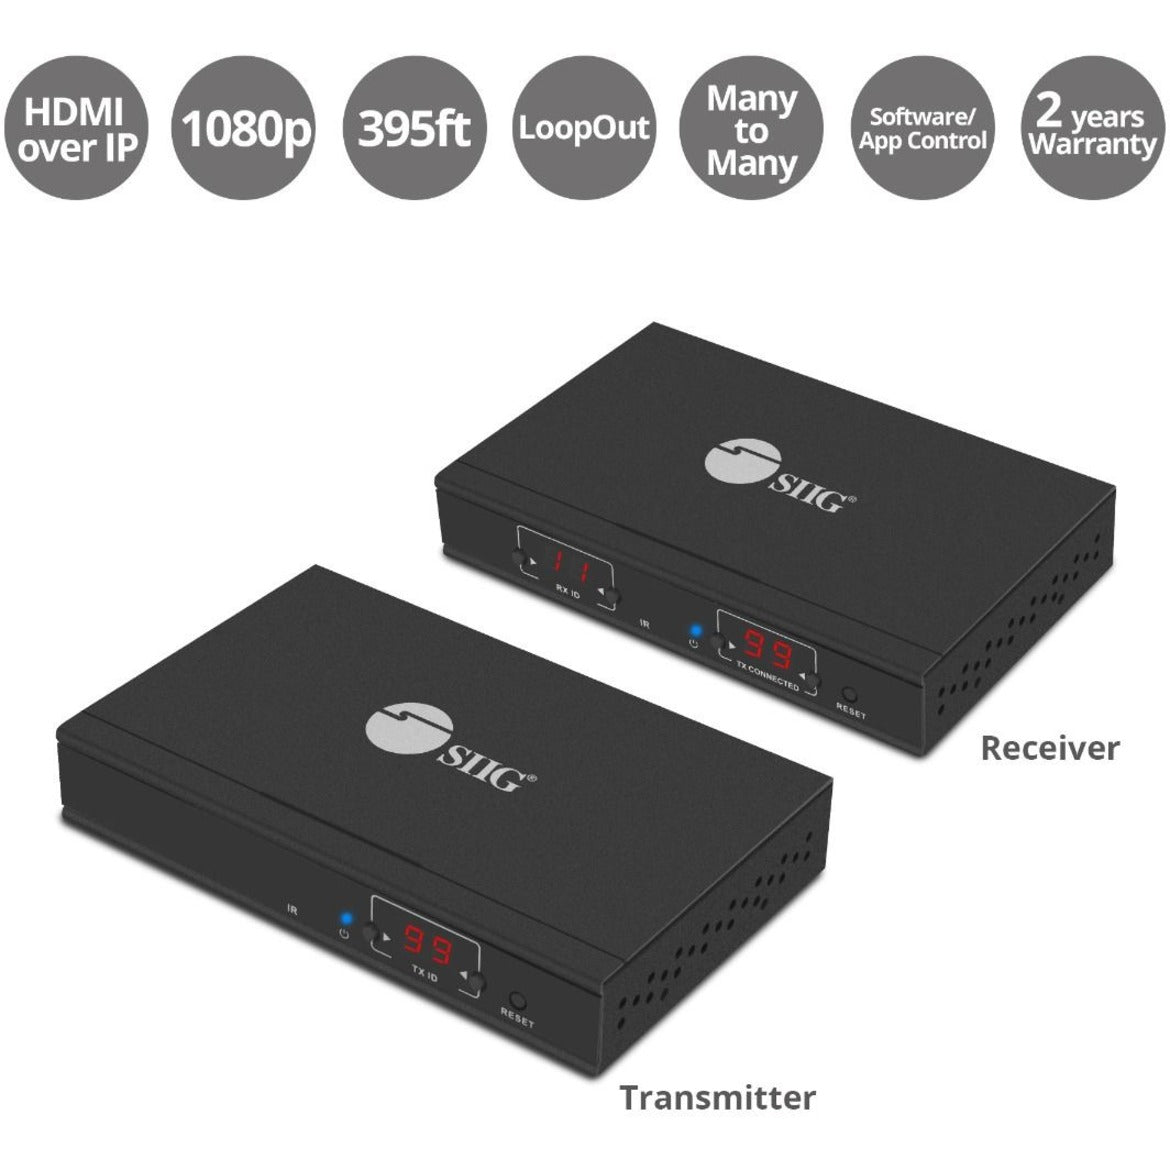 SIIG CE-H23A11-S2 HDMI Over IP Extender with IR - Kit, Full HD 1080p Video Extender Transmitter/Receiver, 2 Year Warranty